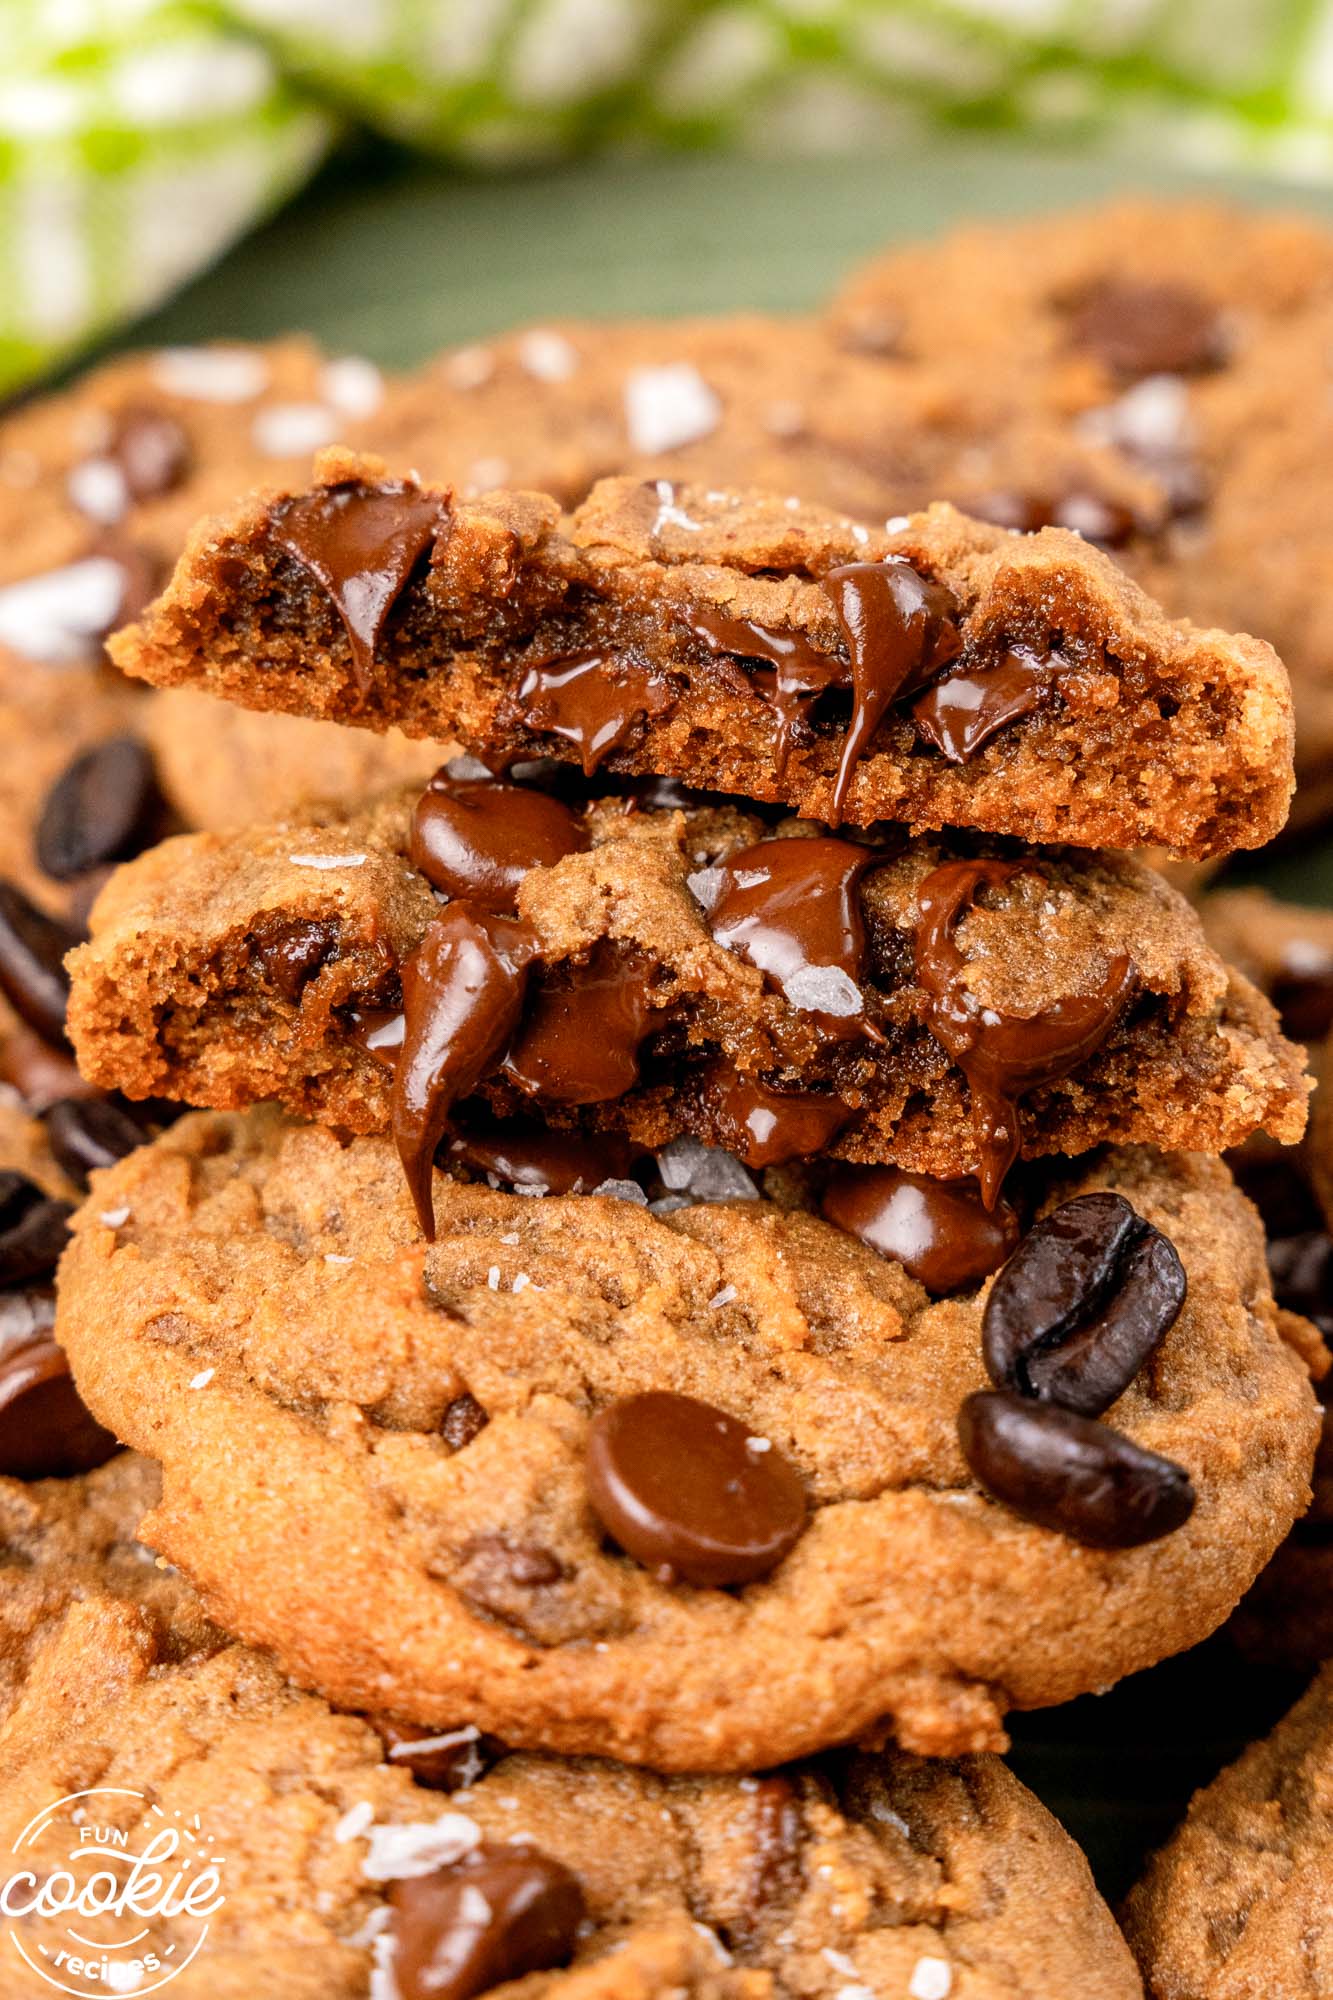 closeup of a pile of coffee cookies. One is broken in half to reveal melty chocolate chips inside.